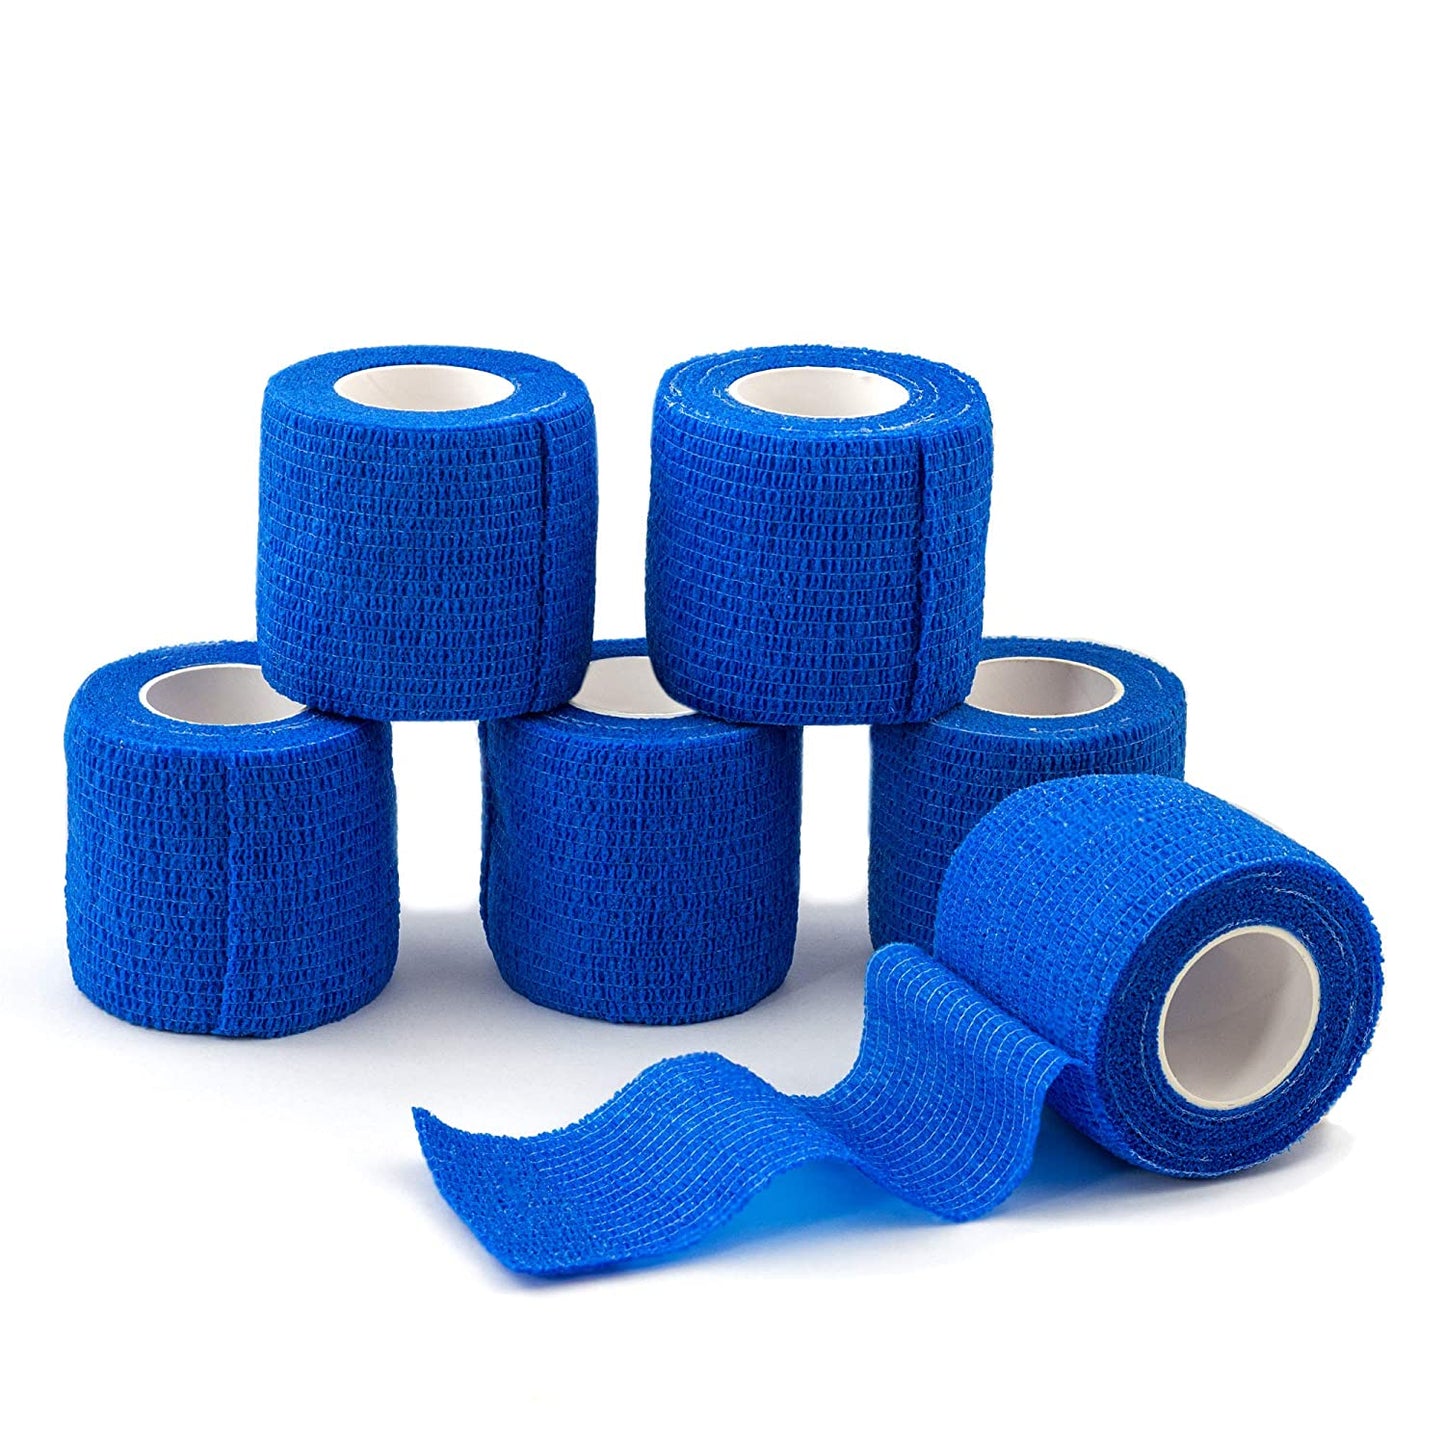 Cut Resistant Tape Adherent Wrap Tape No-Cut Tape for Wood Carving and Whittling NCT6 6Pcs